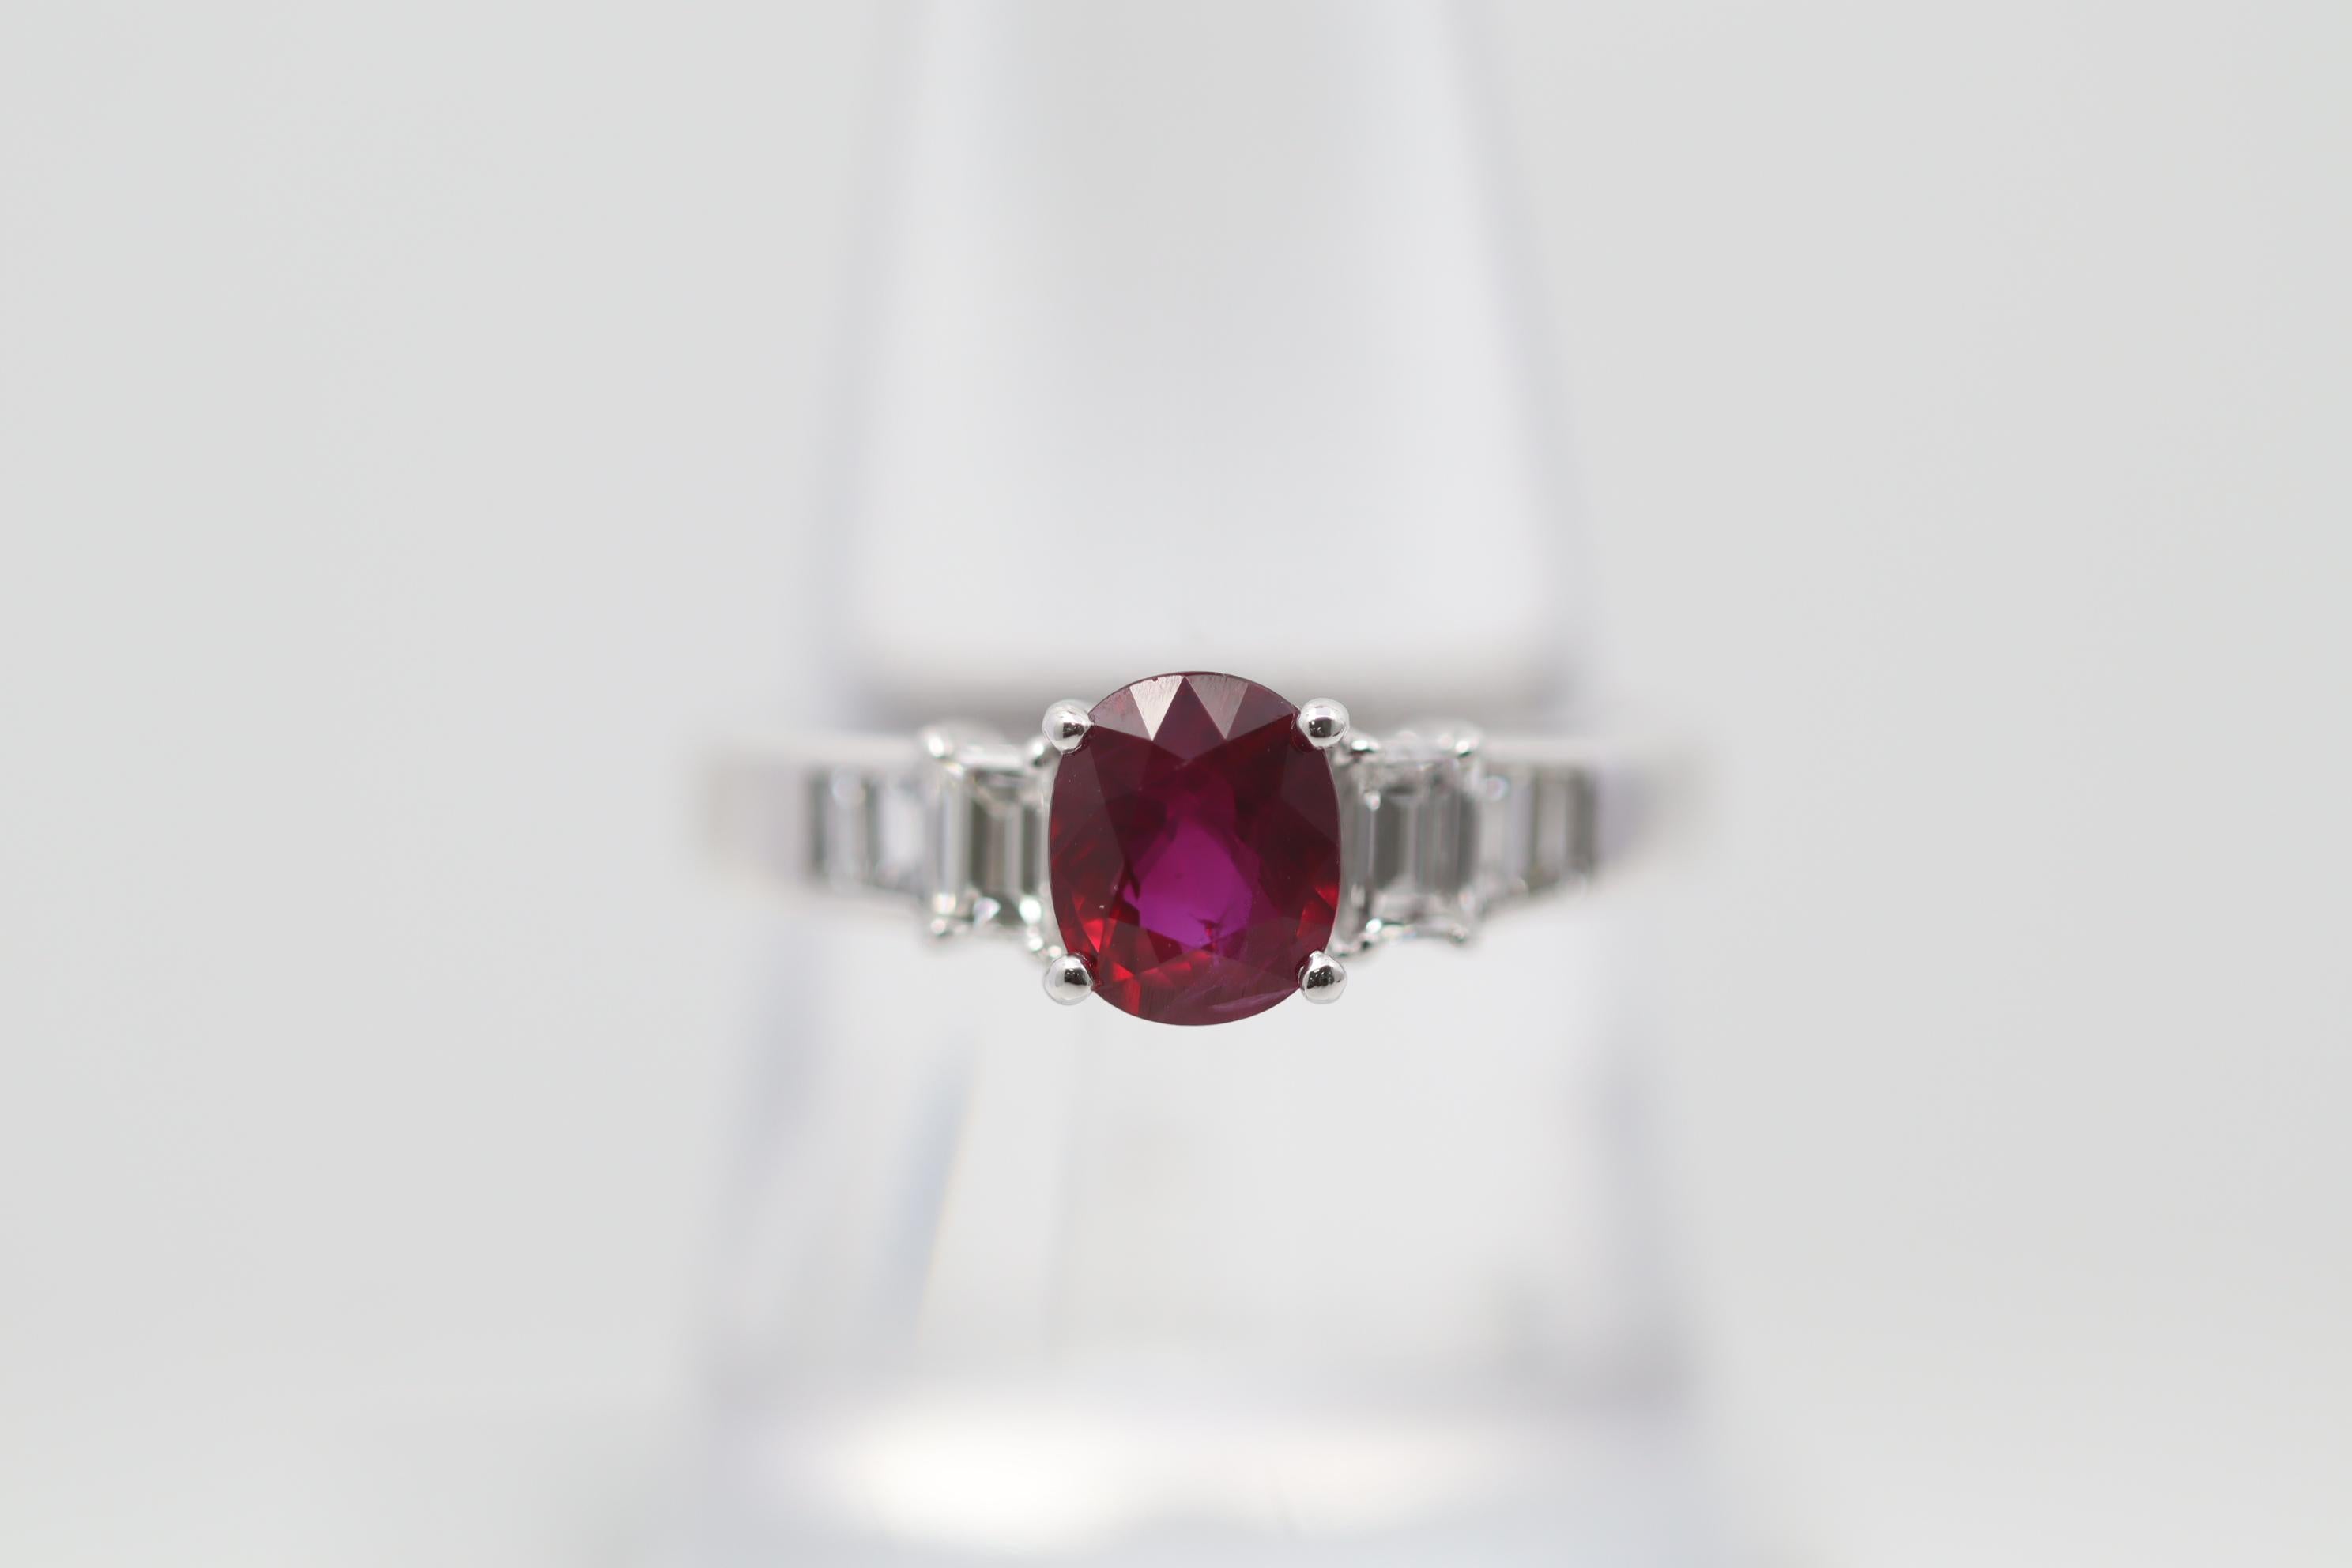 A classic vivid red natural ruby from the most rare and desirable origin, Burma (Myanmar) takes center stage. It is the most desirable mainly due to its amazing color which this ruby has, an intense rich bright red color. It is accented by 0.65